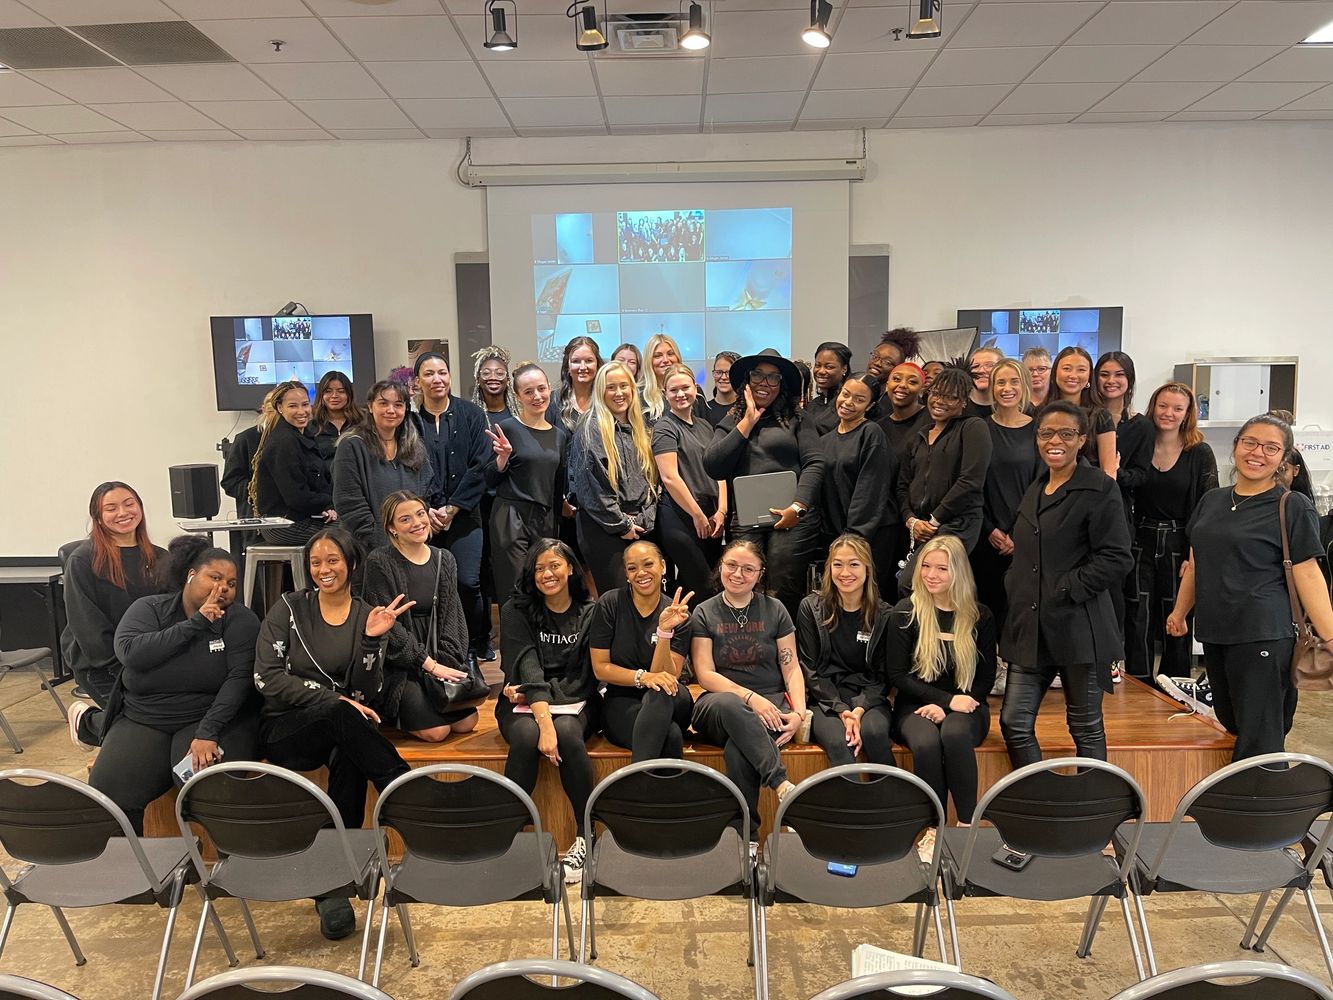 Blue leaf guide cosmetology students at Paul Mitchell the school Atlanta cosmetology school